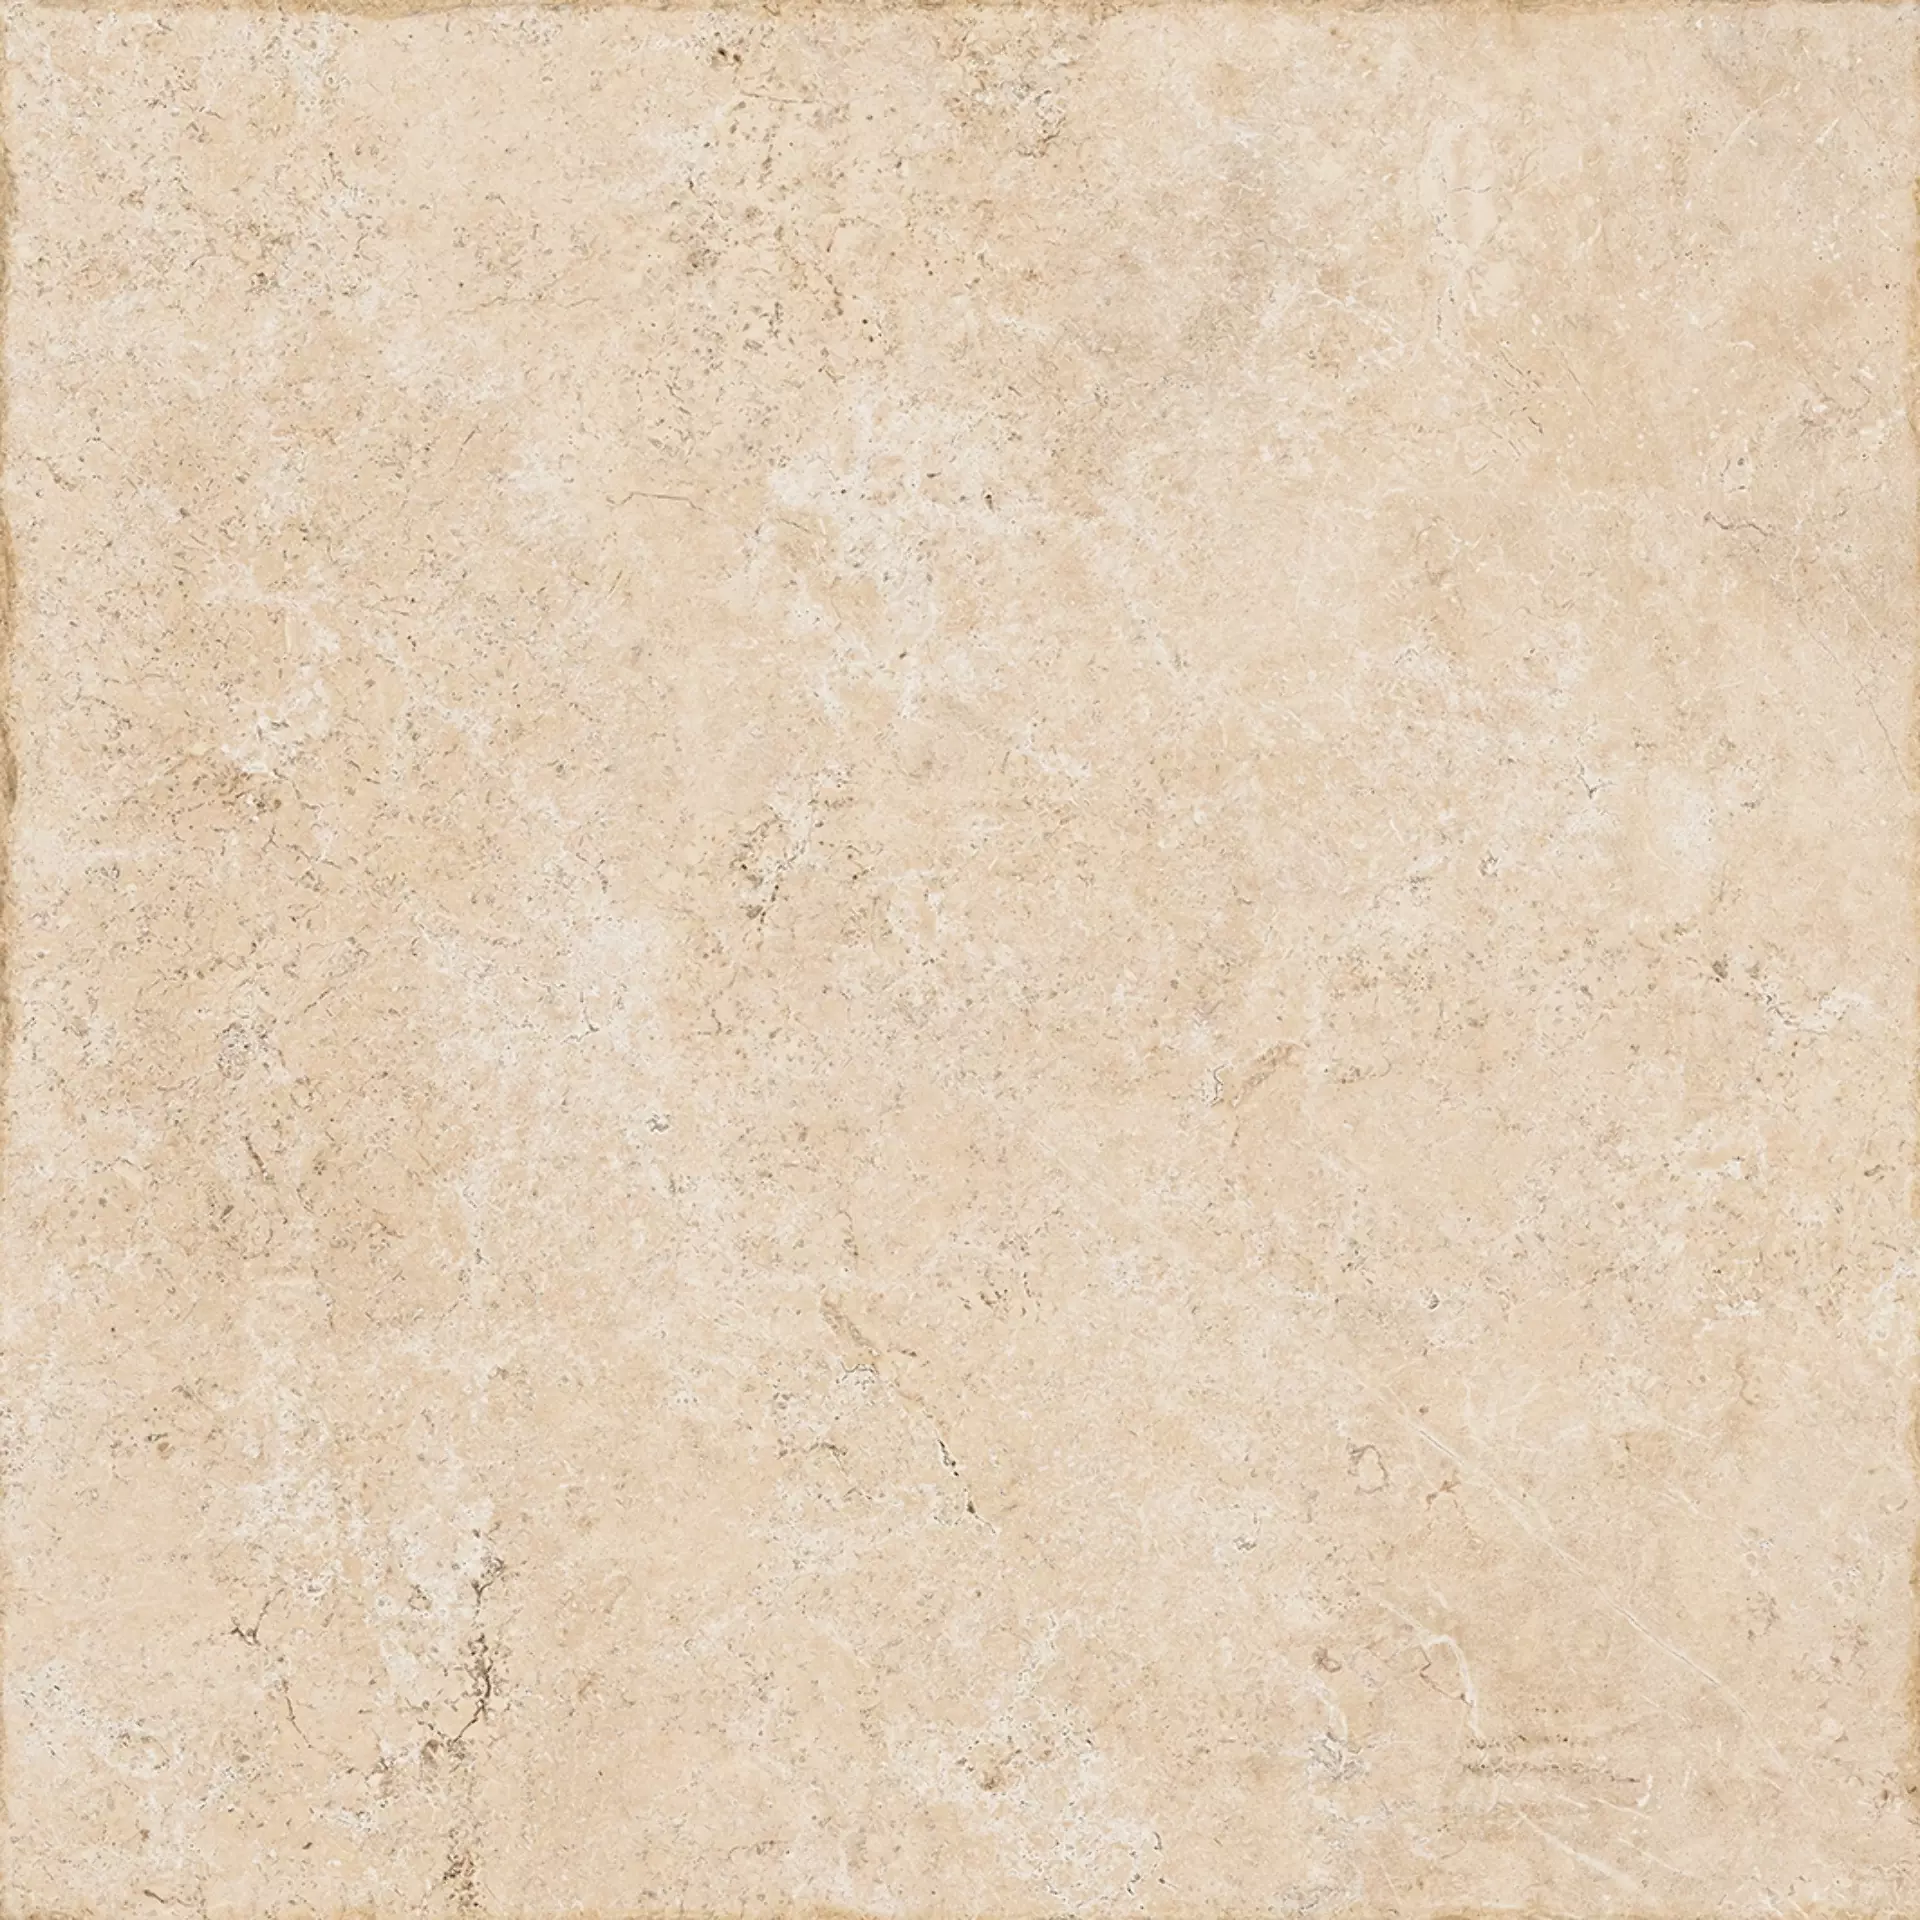 Sichenia Amboise Beige Smooth Chipped Edge 0193242 90x90cm rectified 10mm